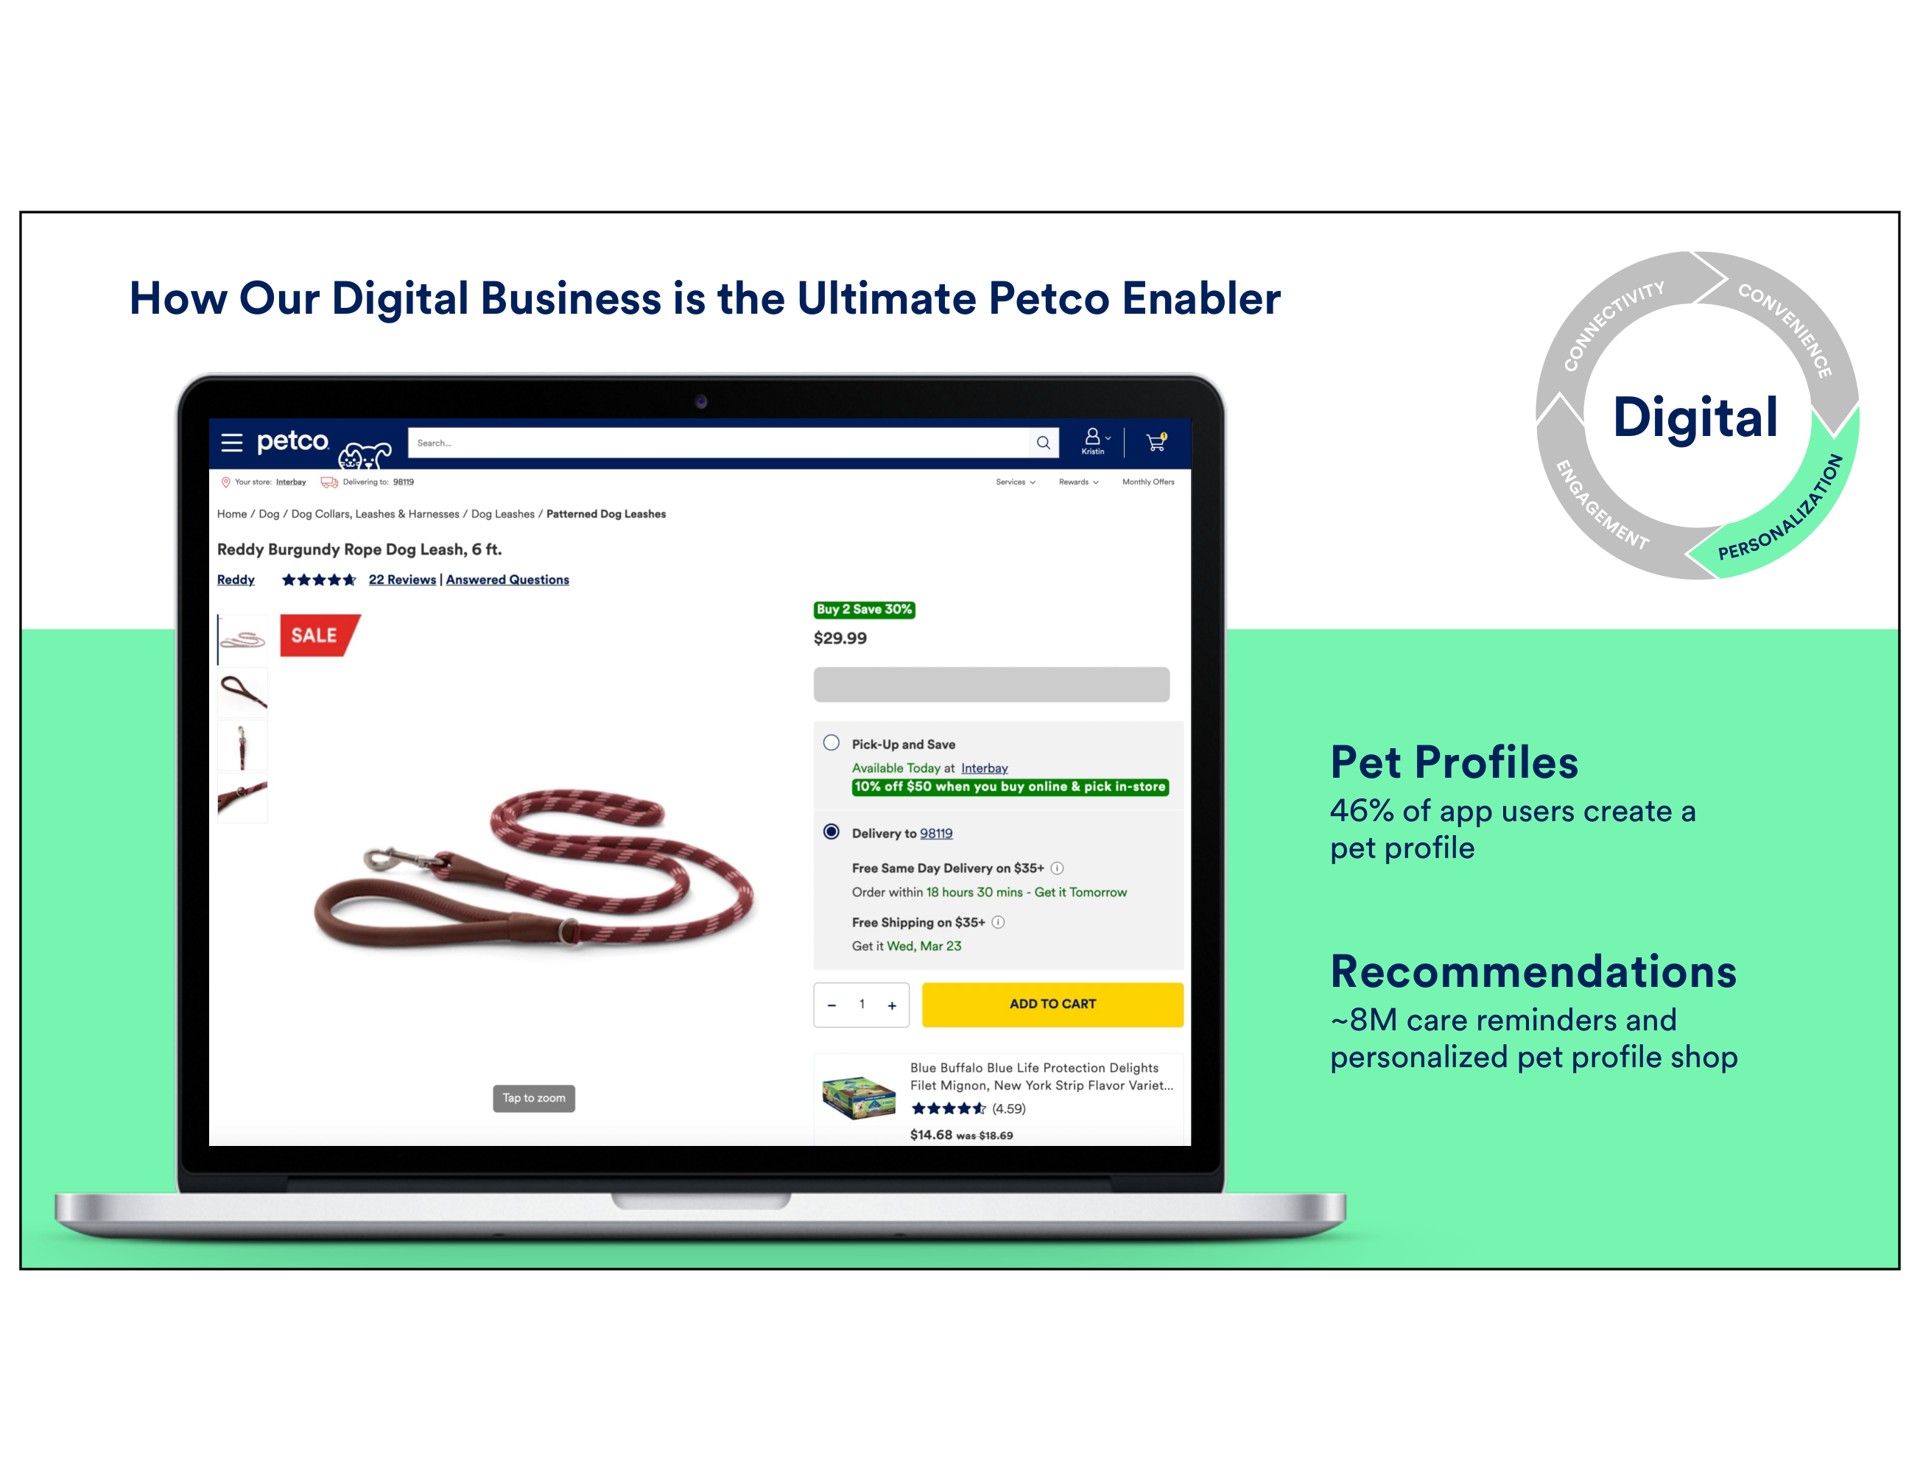 how our digital business is the ultimate enabler digital pet profiles recommendations home dog dog collars leashes harnesses dog leashes patterned dog leashes reddy rope dog leash reddy reviews answered questions pick up and save delivery to free same day delivery on available today at off when you buy pick in store personalized profile shop of users create a profile care reminders and order within hours mins get it tomorrow filet mignon new york strip flavor blue buffalo blue life protection delights free shipping on was get it wed mar add to cart i | Petco